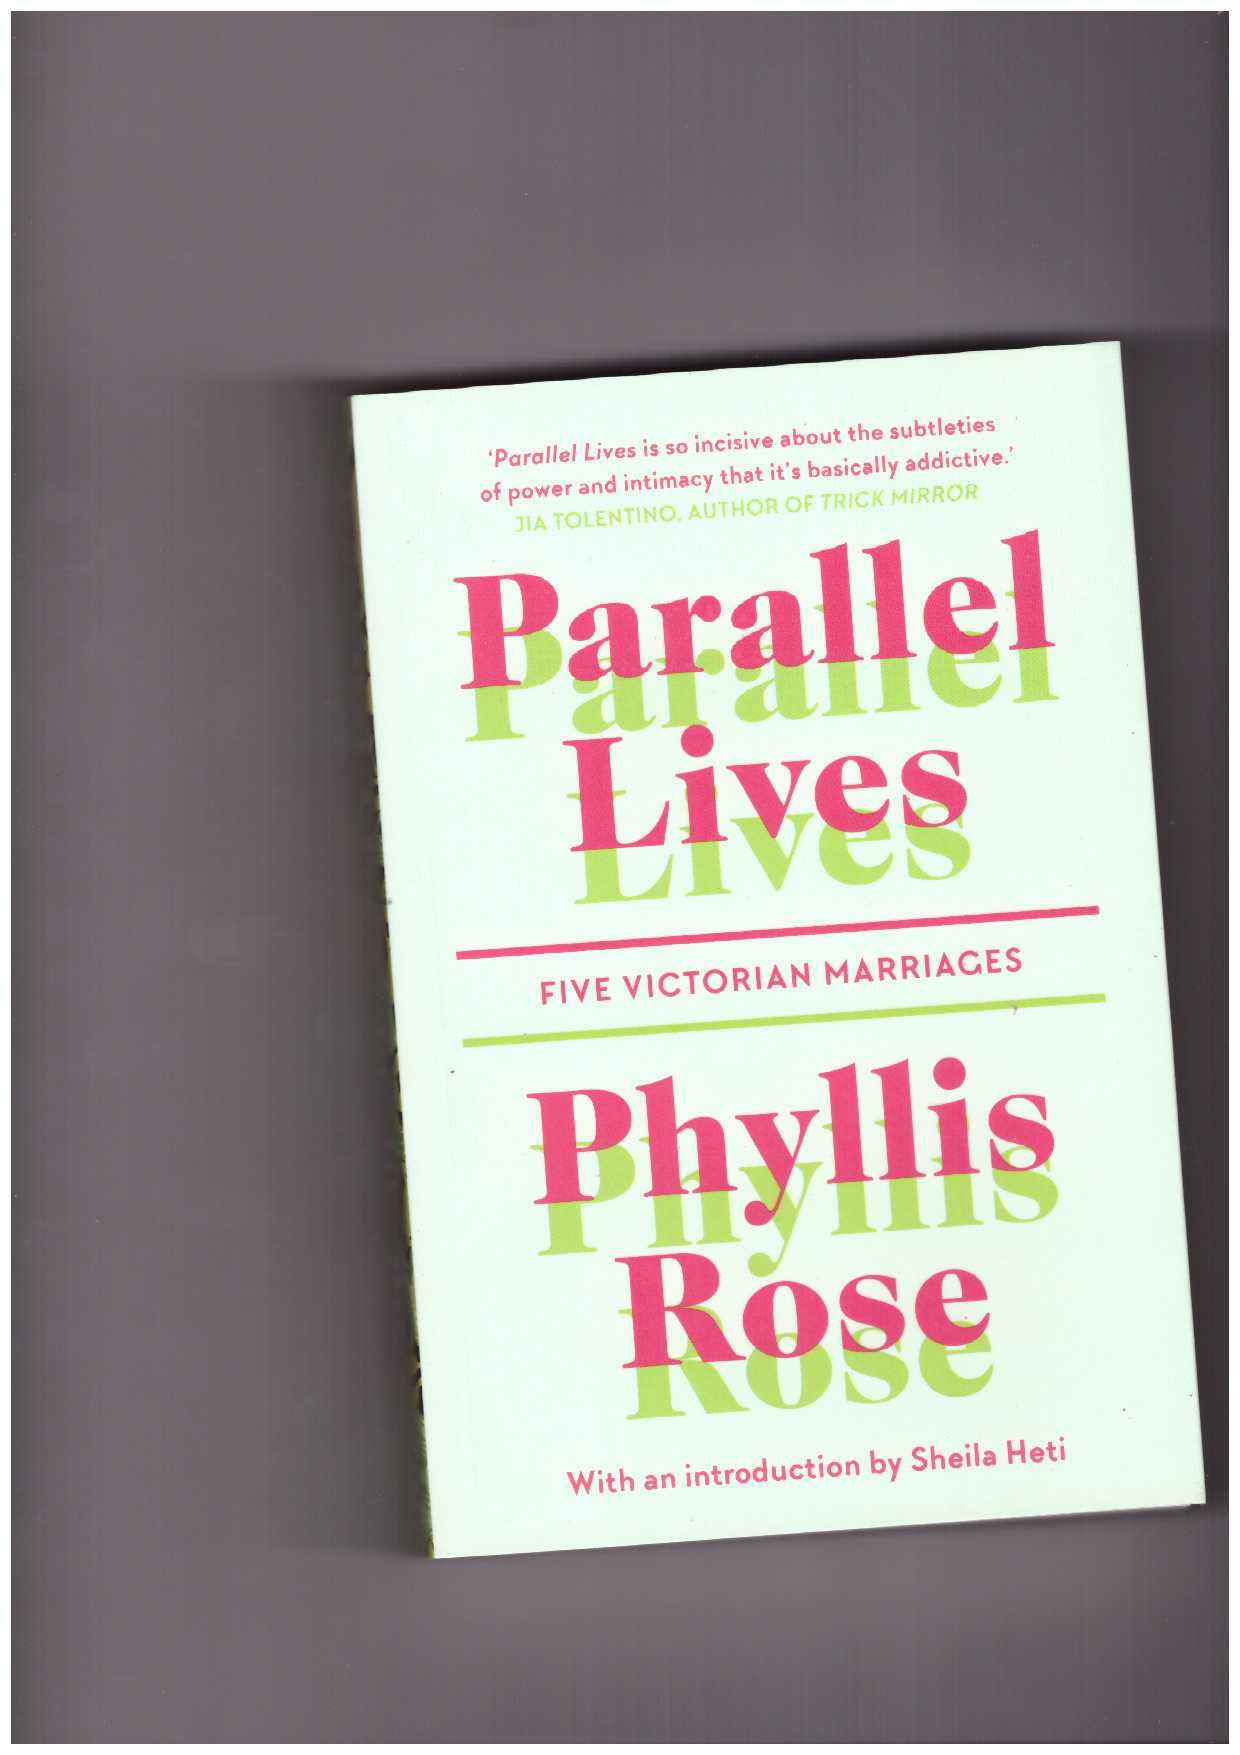 ROSE, Phyllis - Parallel Lives. Five Victorian Marriages